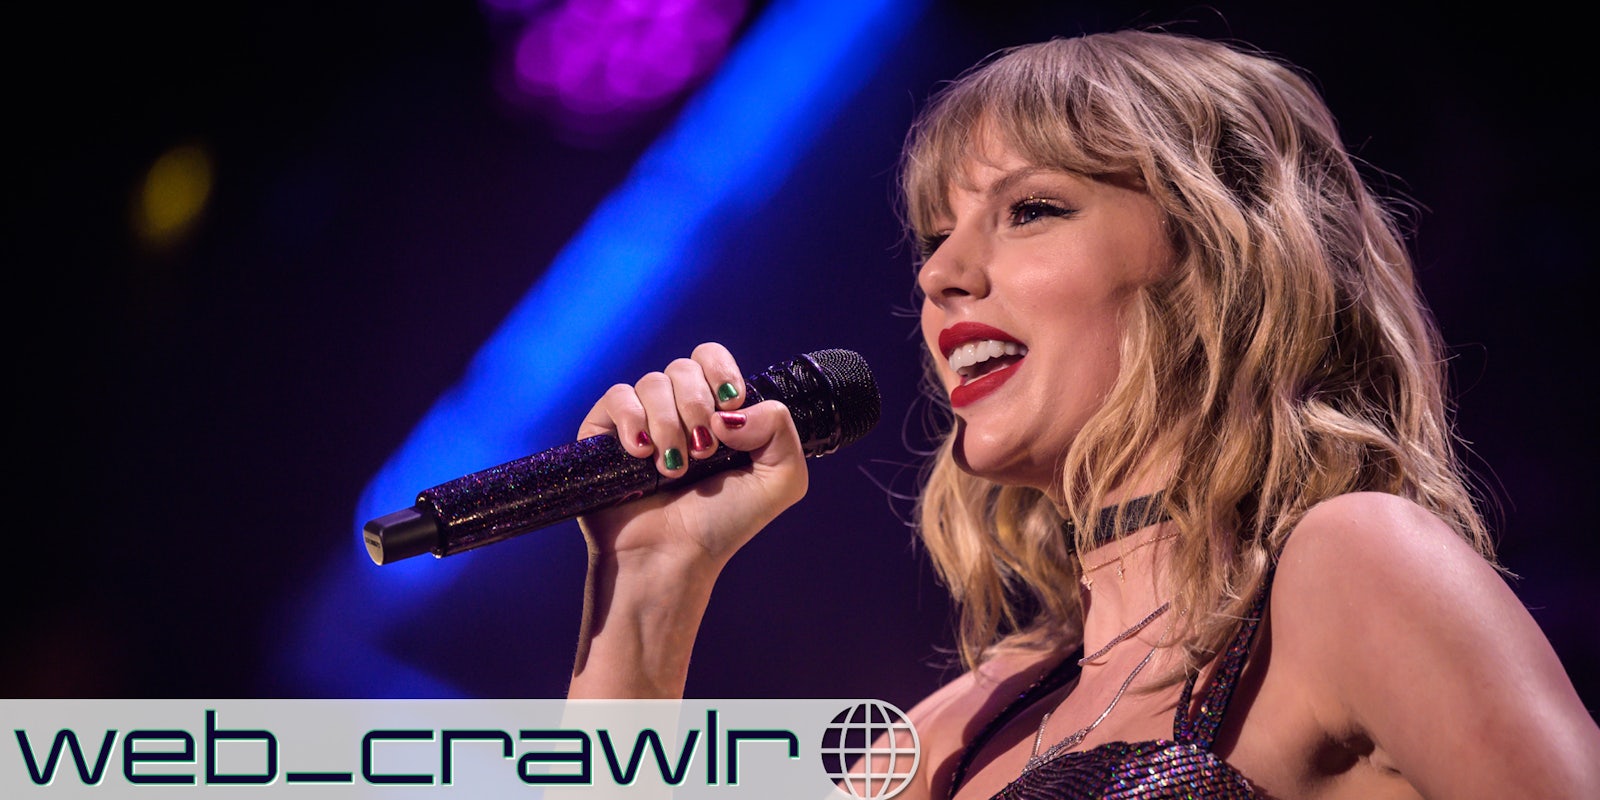 Taylor Swift holding a microphone. The Daily Dot newsletter web_crawlr logo is in the bottom left corner.